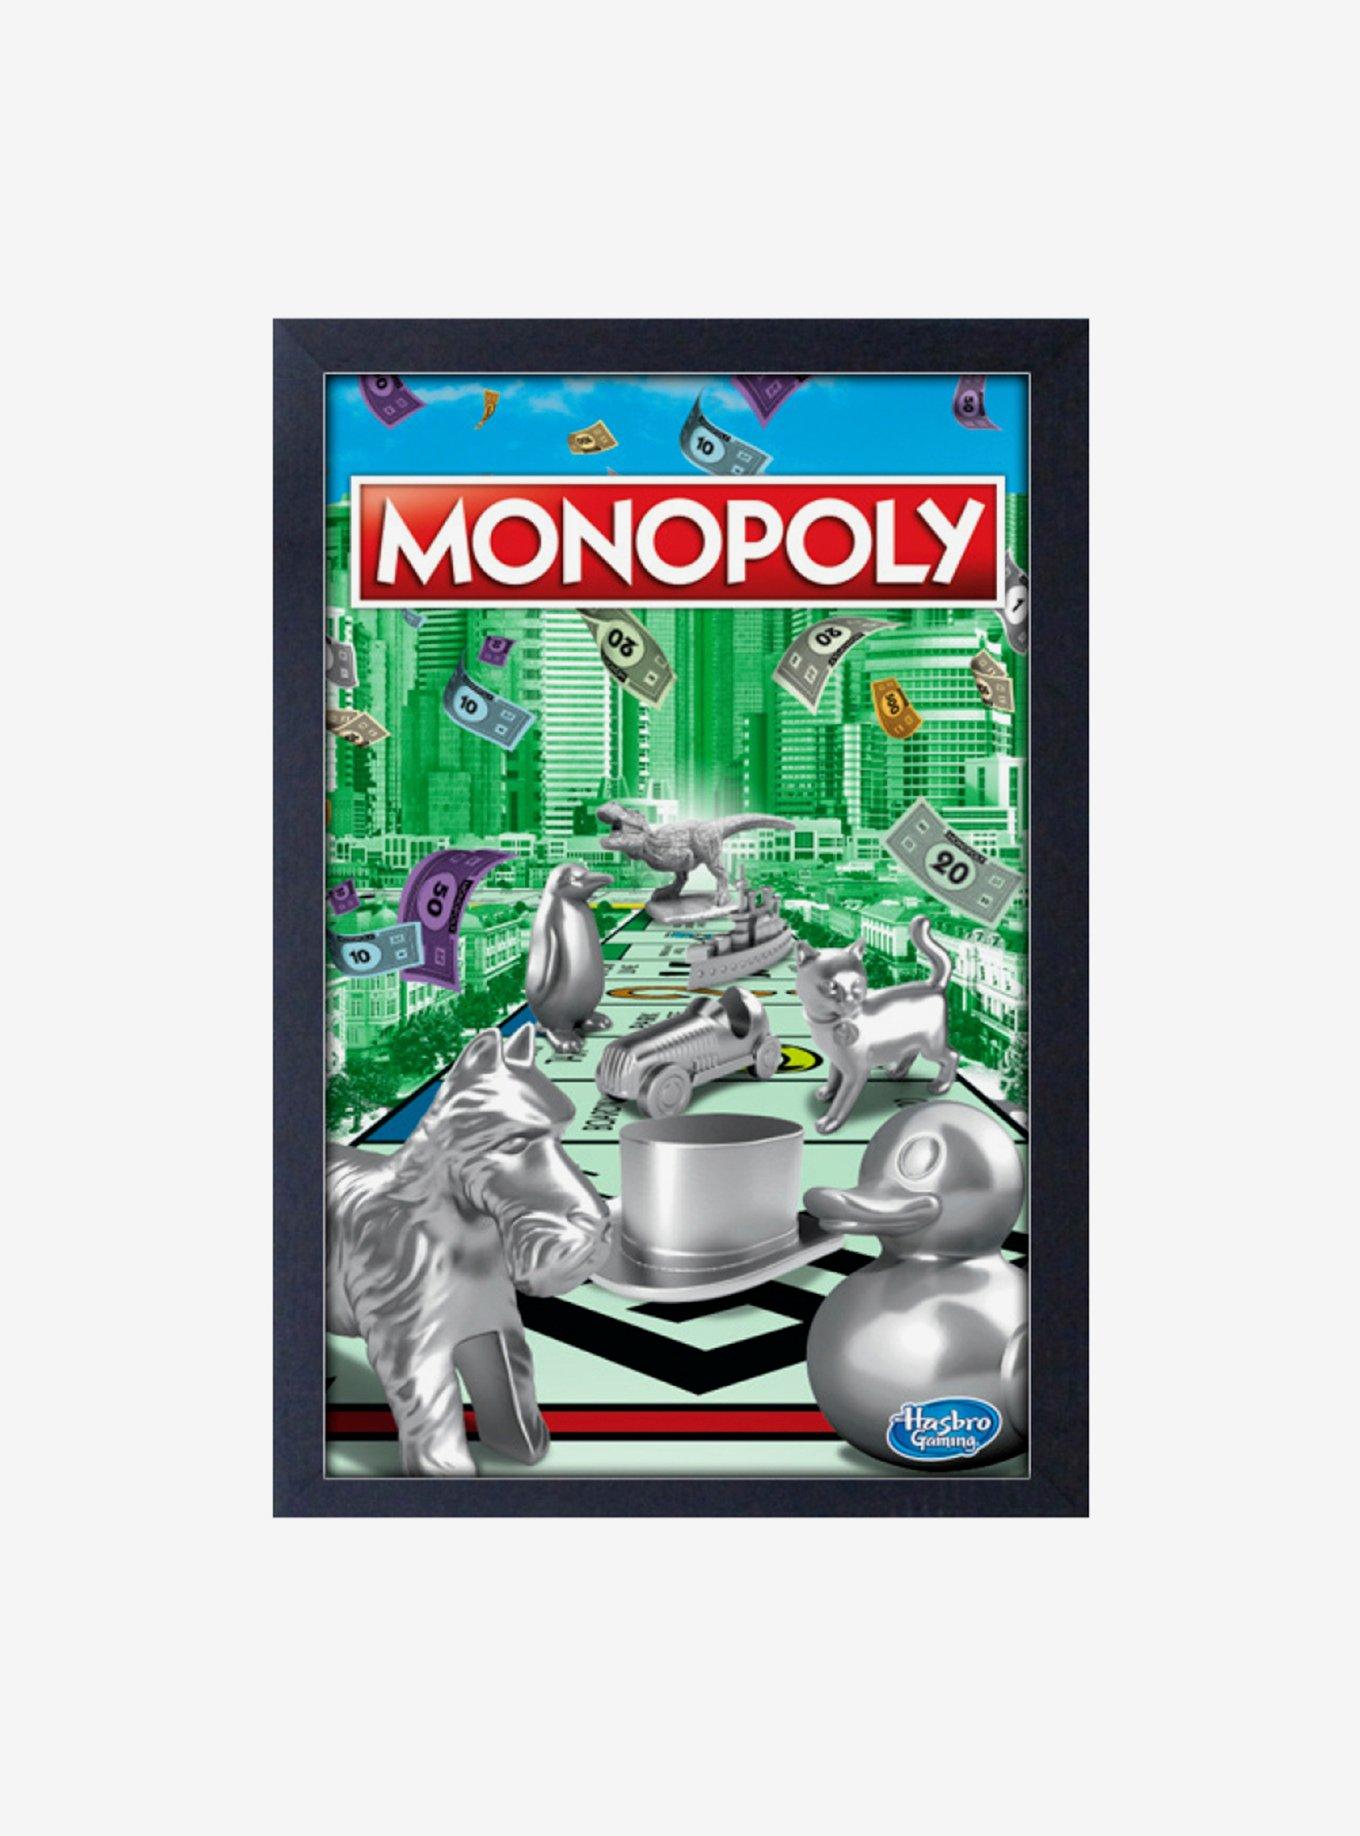 Monopoly Poster Framed Wood Wall Art